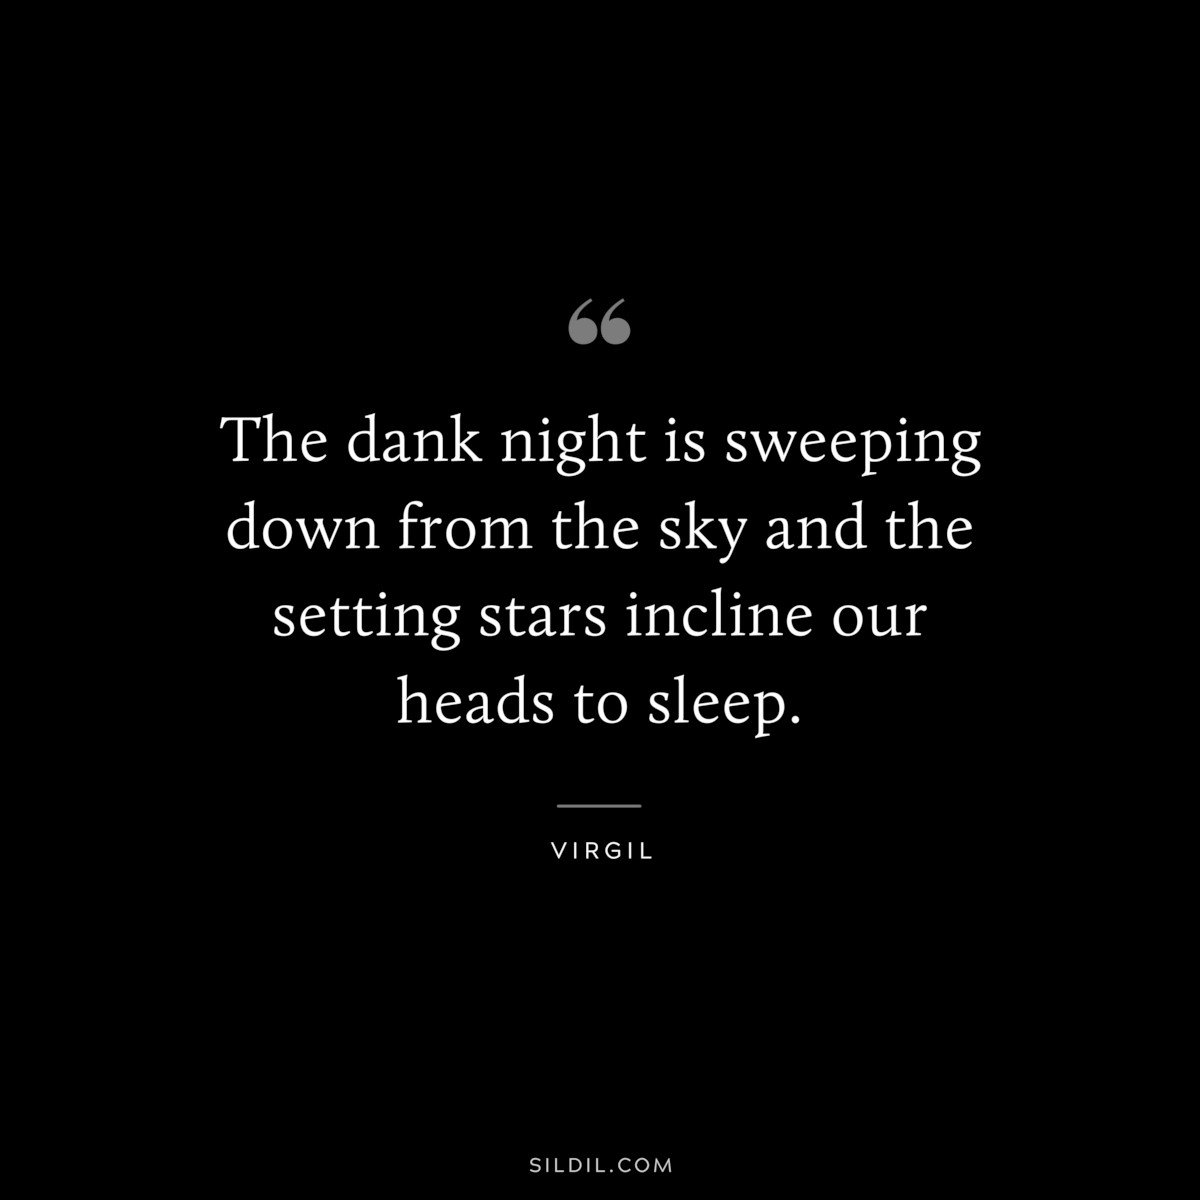 The dank night is sweeping down from the sky and the setting stars incline our heads to sleep. ― Virgil